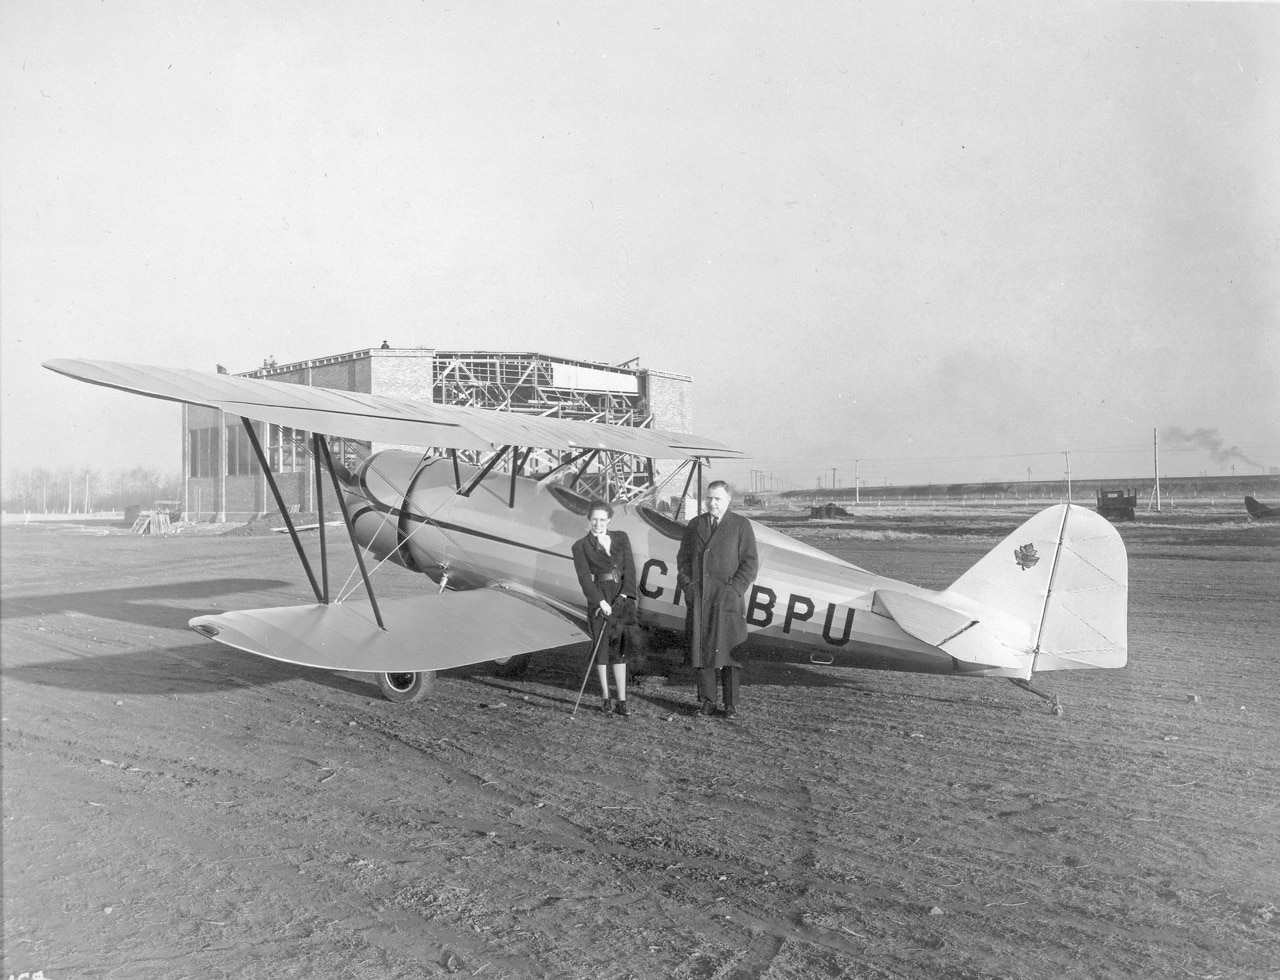 Black and white photo pf Elsie MacGill, holding a cane, on the left and a man on the right stand in front of a two seater aircraft on a dirt runway.